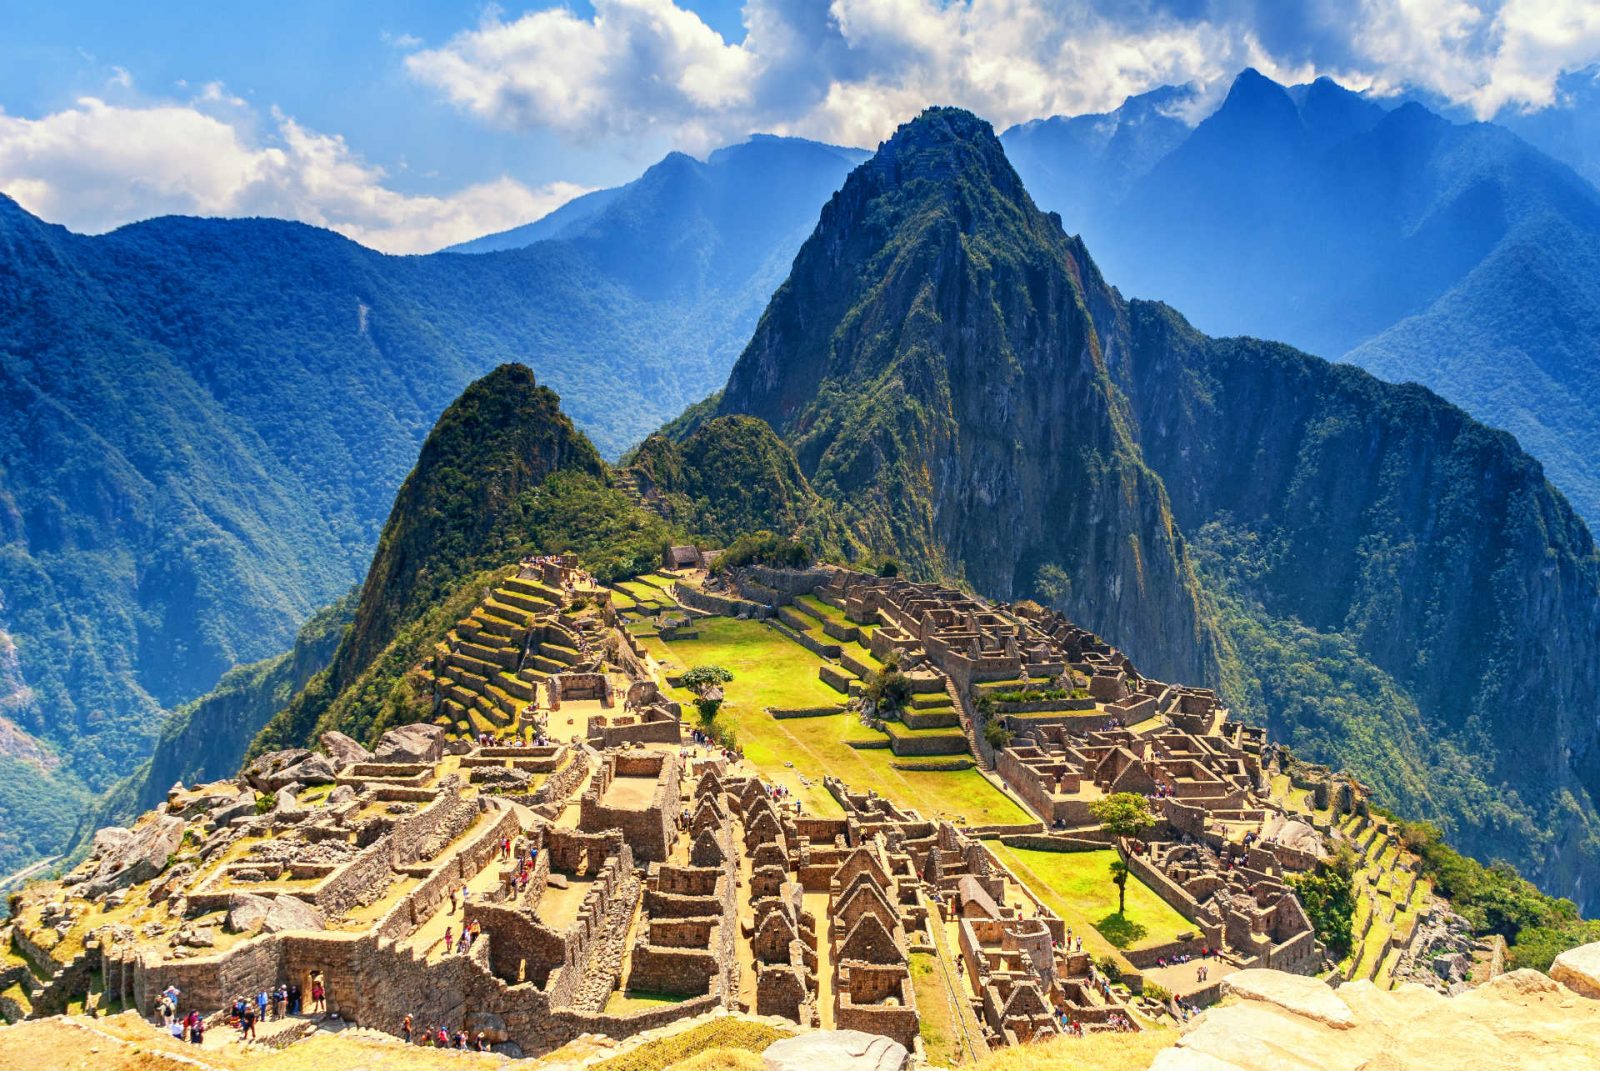 🗺 Most People Can’t Match 20/24 of These Famous Places to Their Country on a Map – Can You? Machu Picchu, Inca Empire civilization, Peru